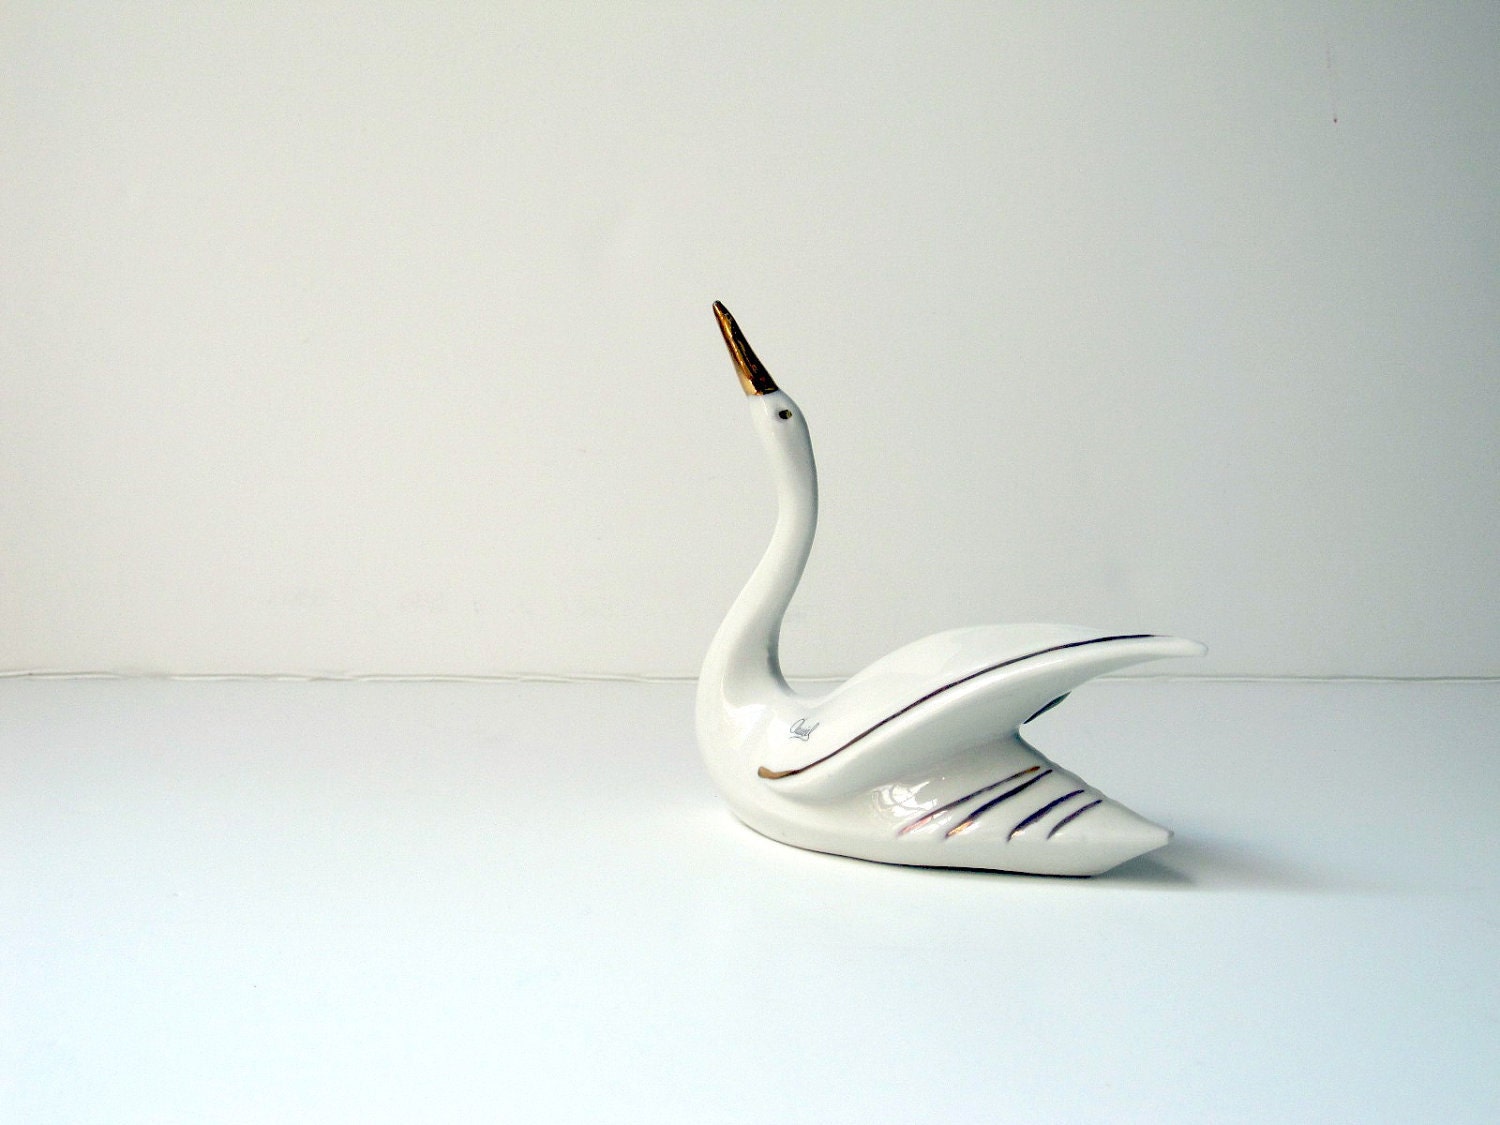 Vintage White Porcelain Swan Figurine - Swan Statue - Made in Italy - White and Gold